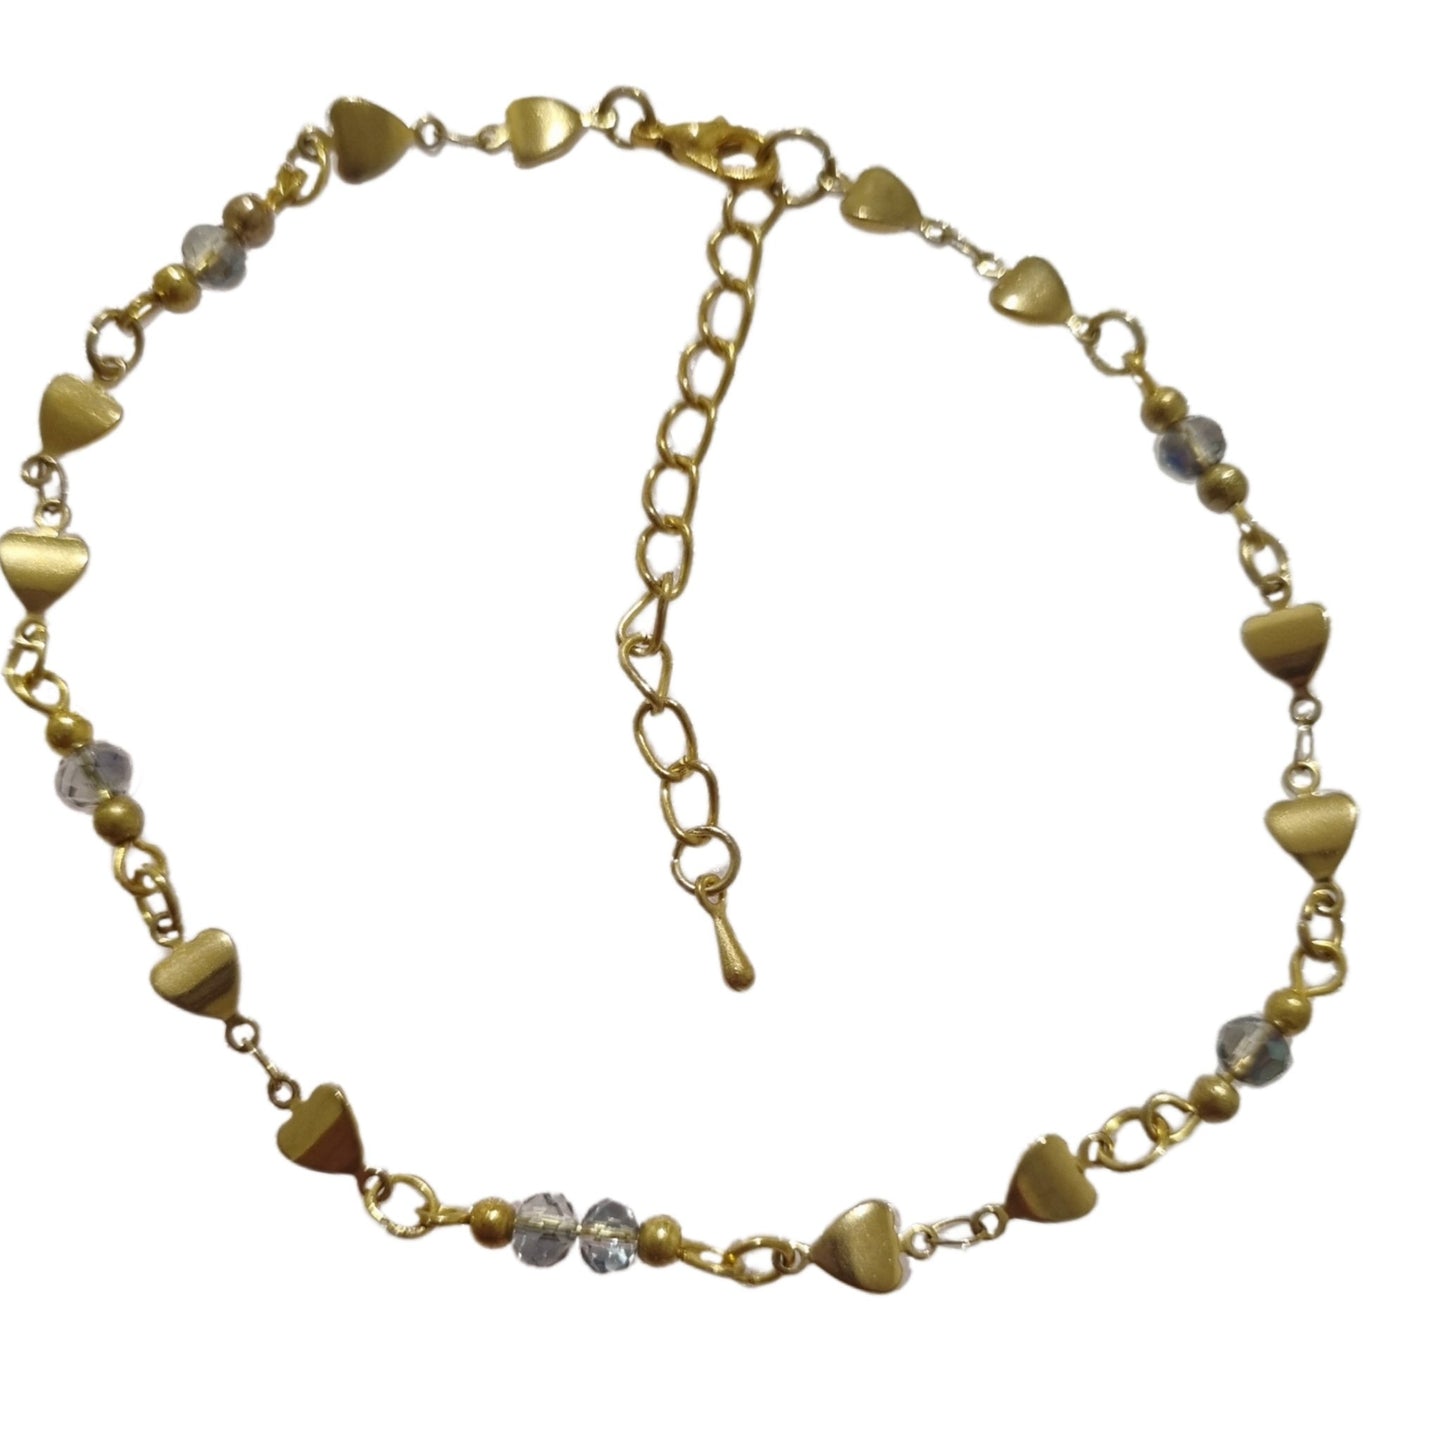 Anklet of Gold Hearts - AbcdepaHorseJewelry